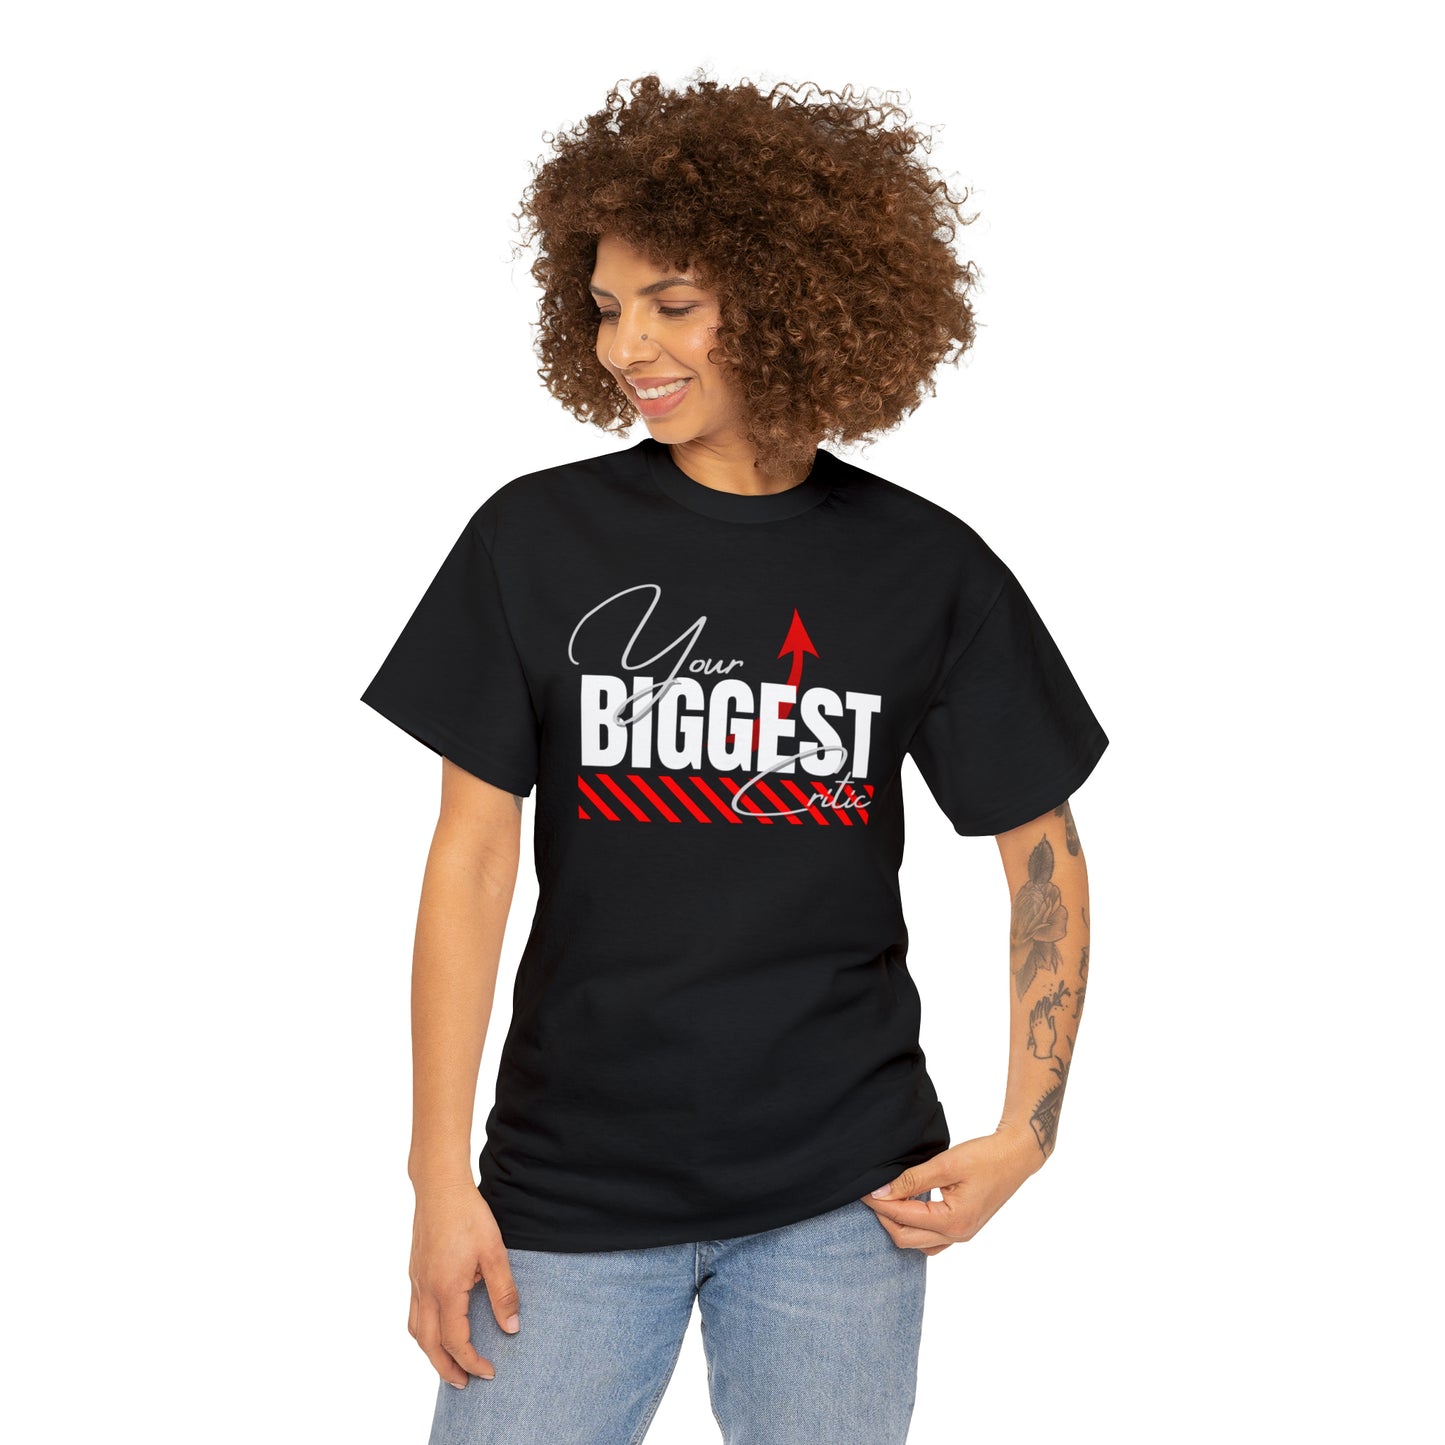 Your Biggest Critic Unisex Tee Sizes 4XL & 5XL - AH VISION